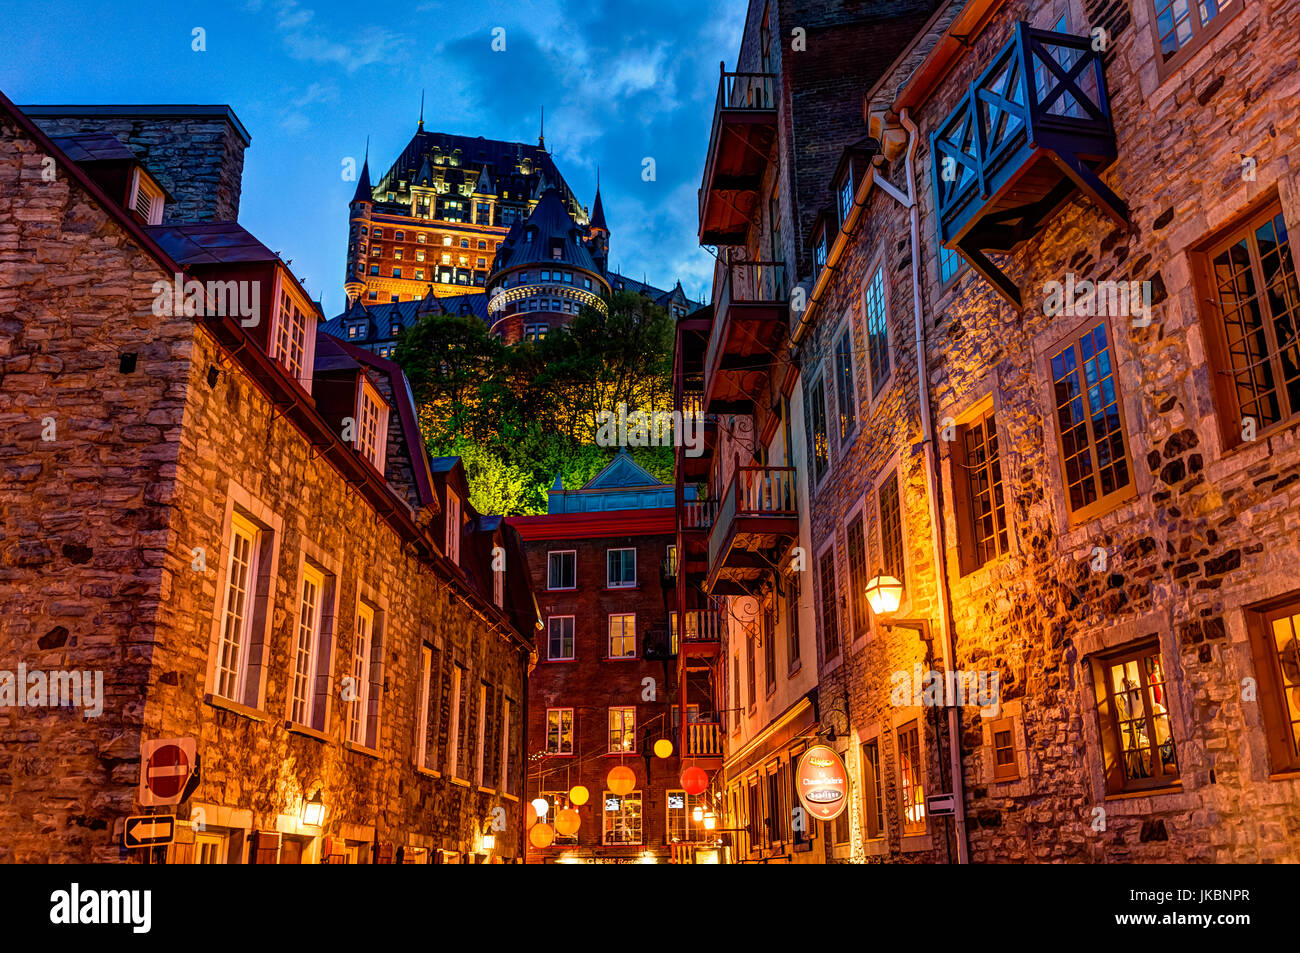 Quebec City, Canada - May 31, 2017: Lower old town cobblestone street called Sous le Fort with restaurants and Boutique La Chasse-galerie at night Stock Photo